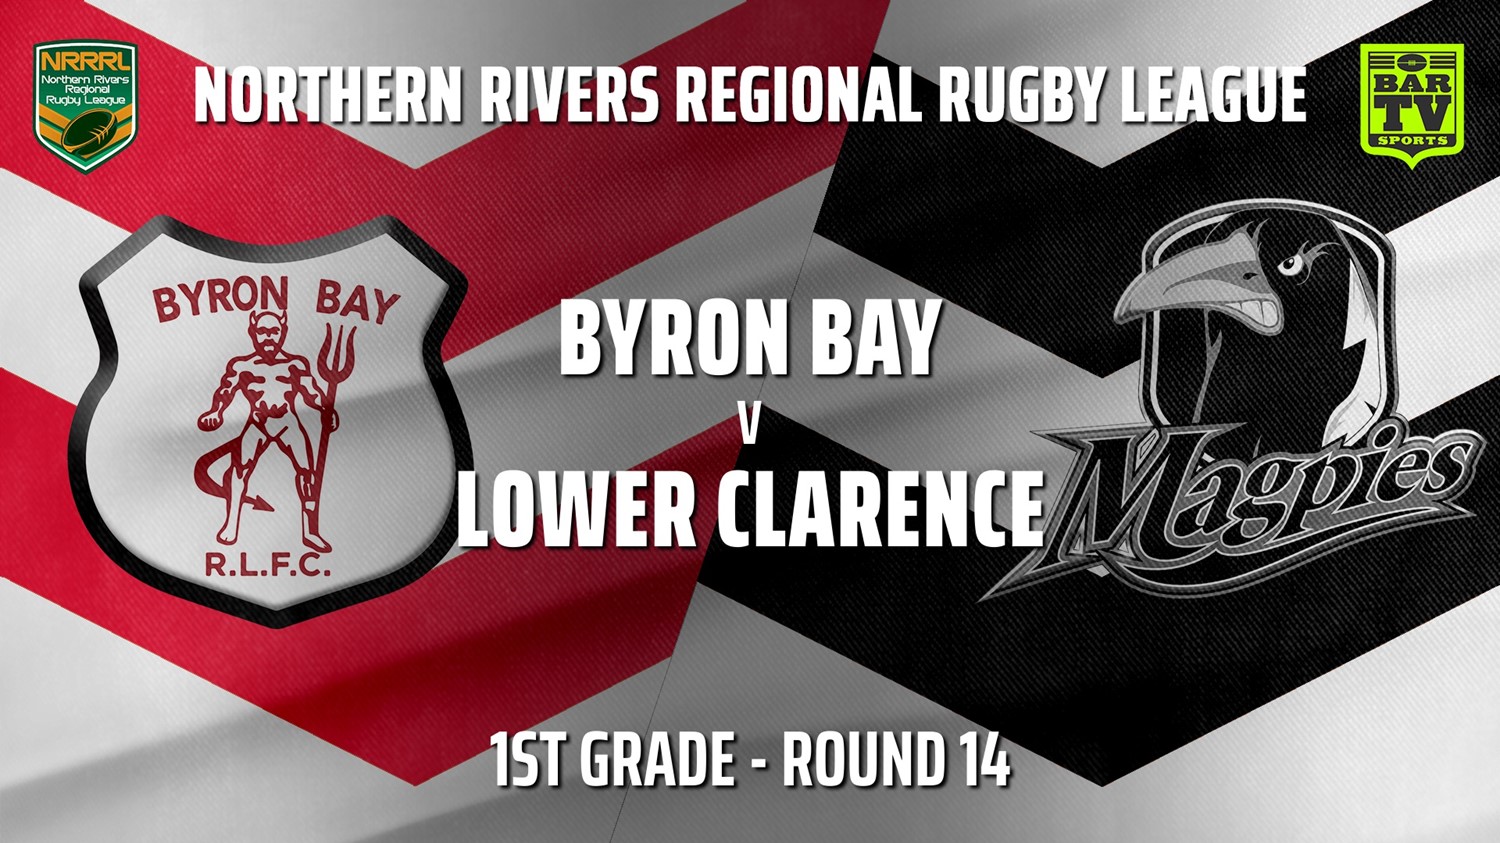 210808-Northern Rivers Round 14 - 1st Grade - Byron Bay Red Devils v Lower Clarence Magpies Slate Image